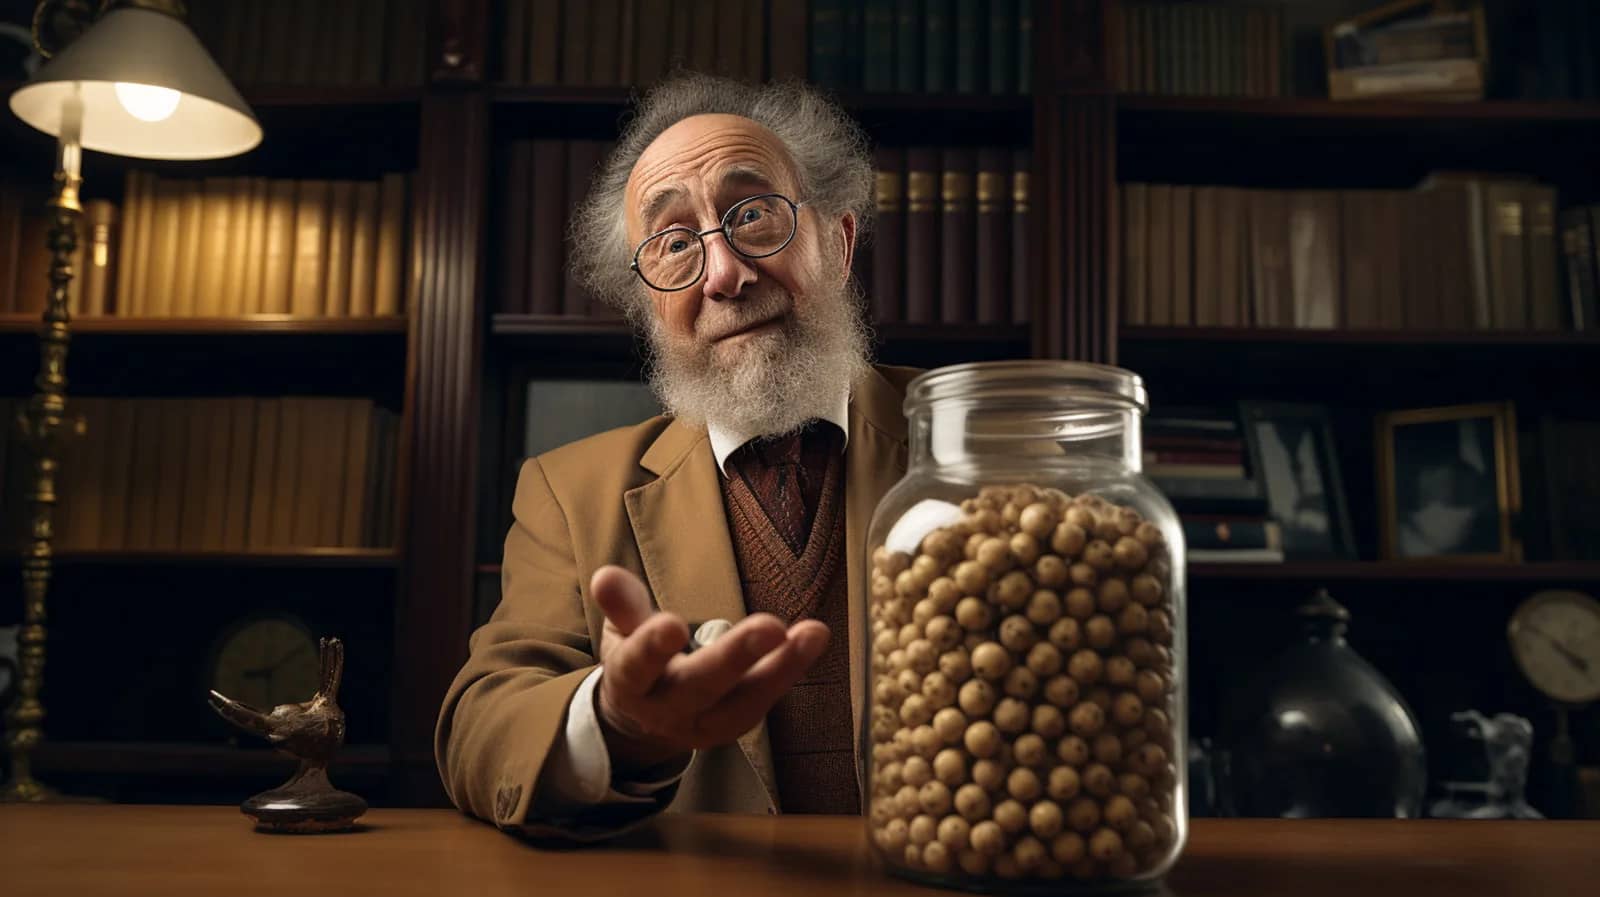 A Professor, a Jar full golf balls, and a Timeless Lesson on Life's Priorities